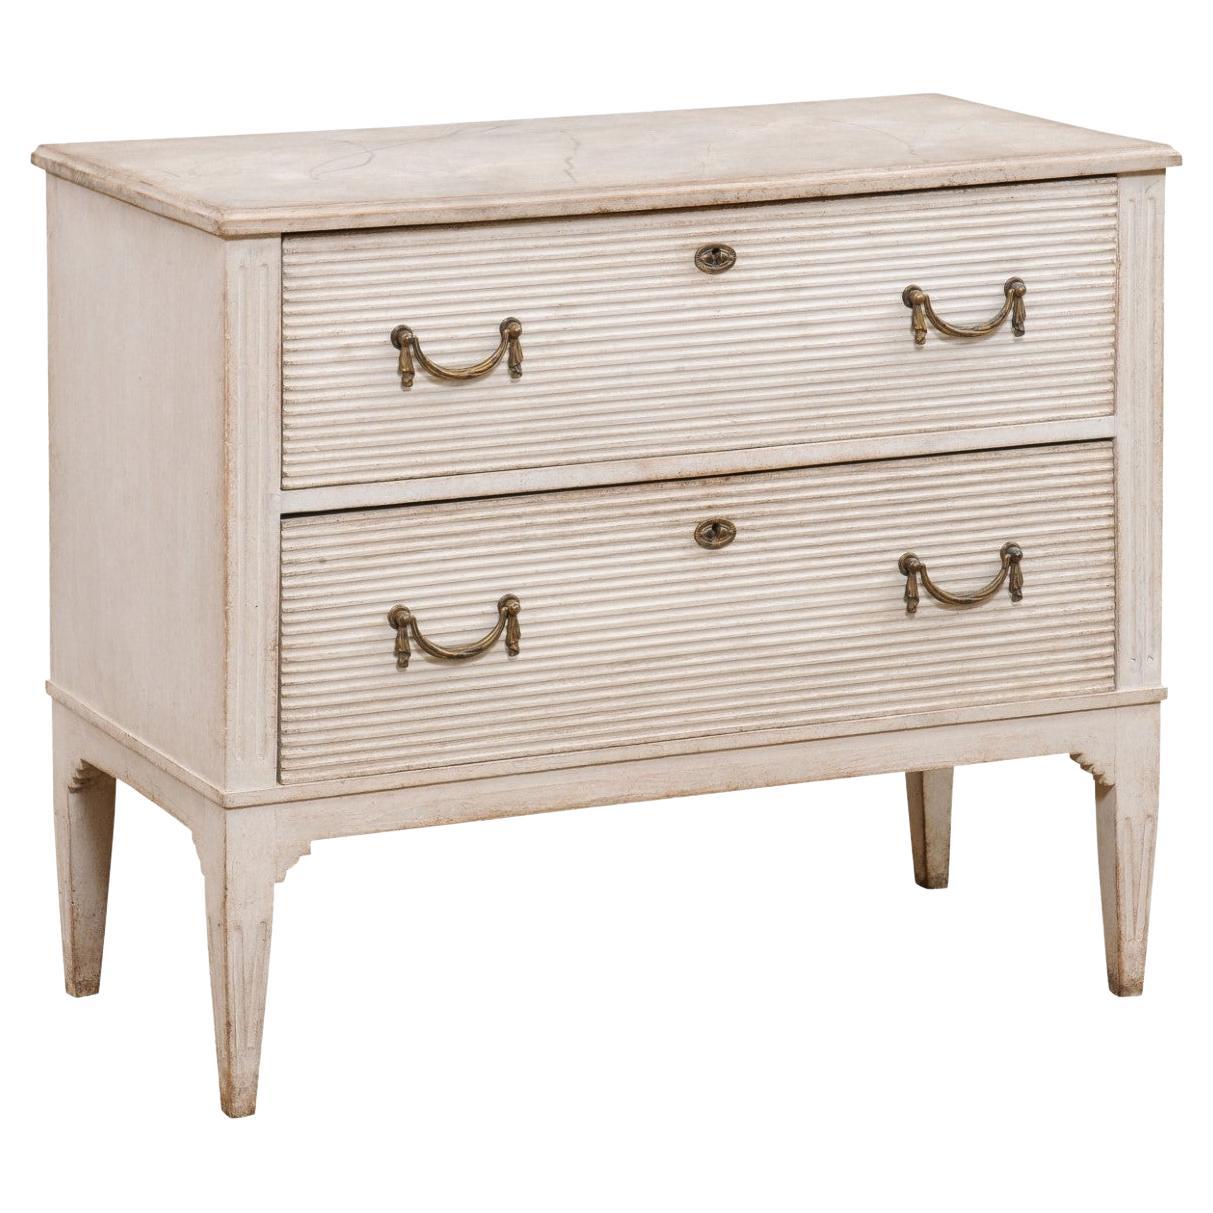 Swedish Gustavian Style 19th Century Painted Wood Chest with Reeded Accents For Sale